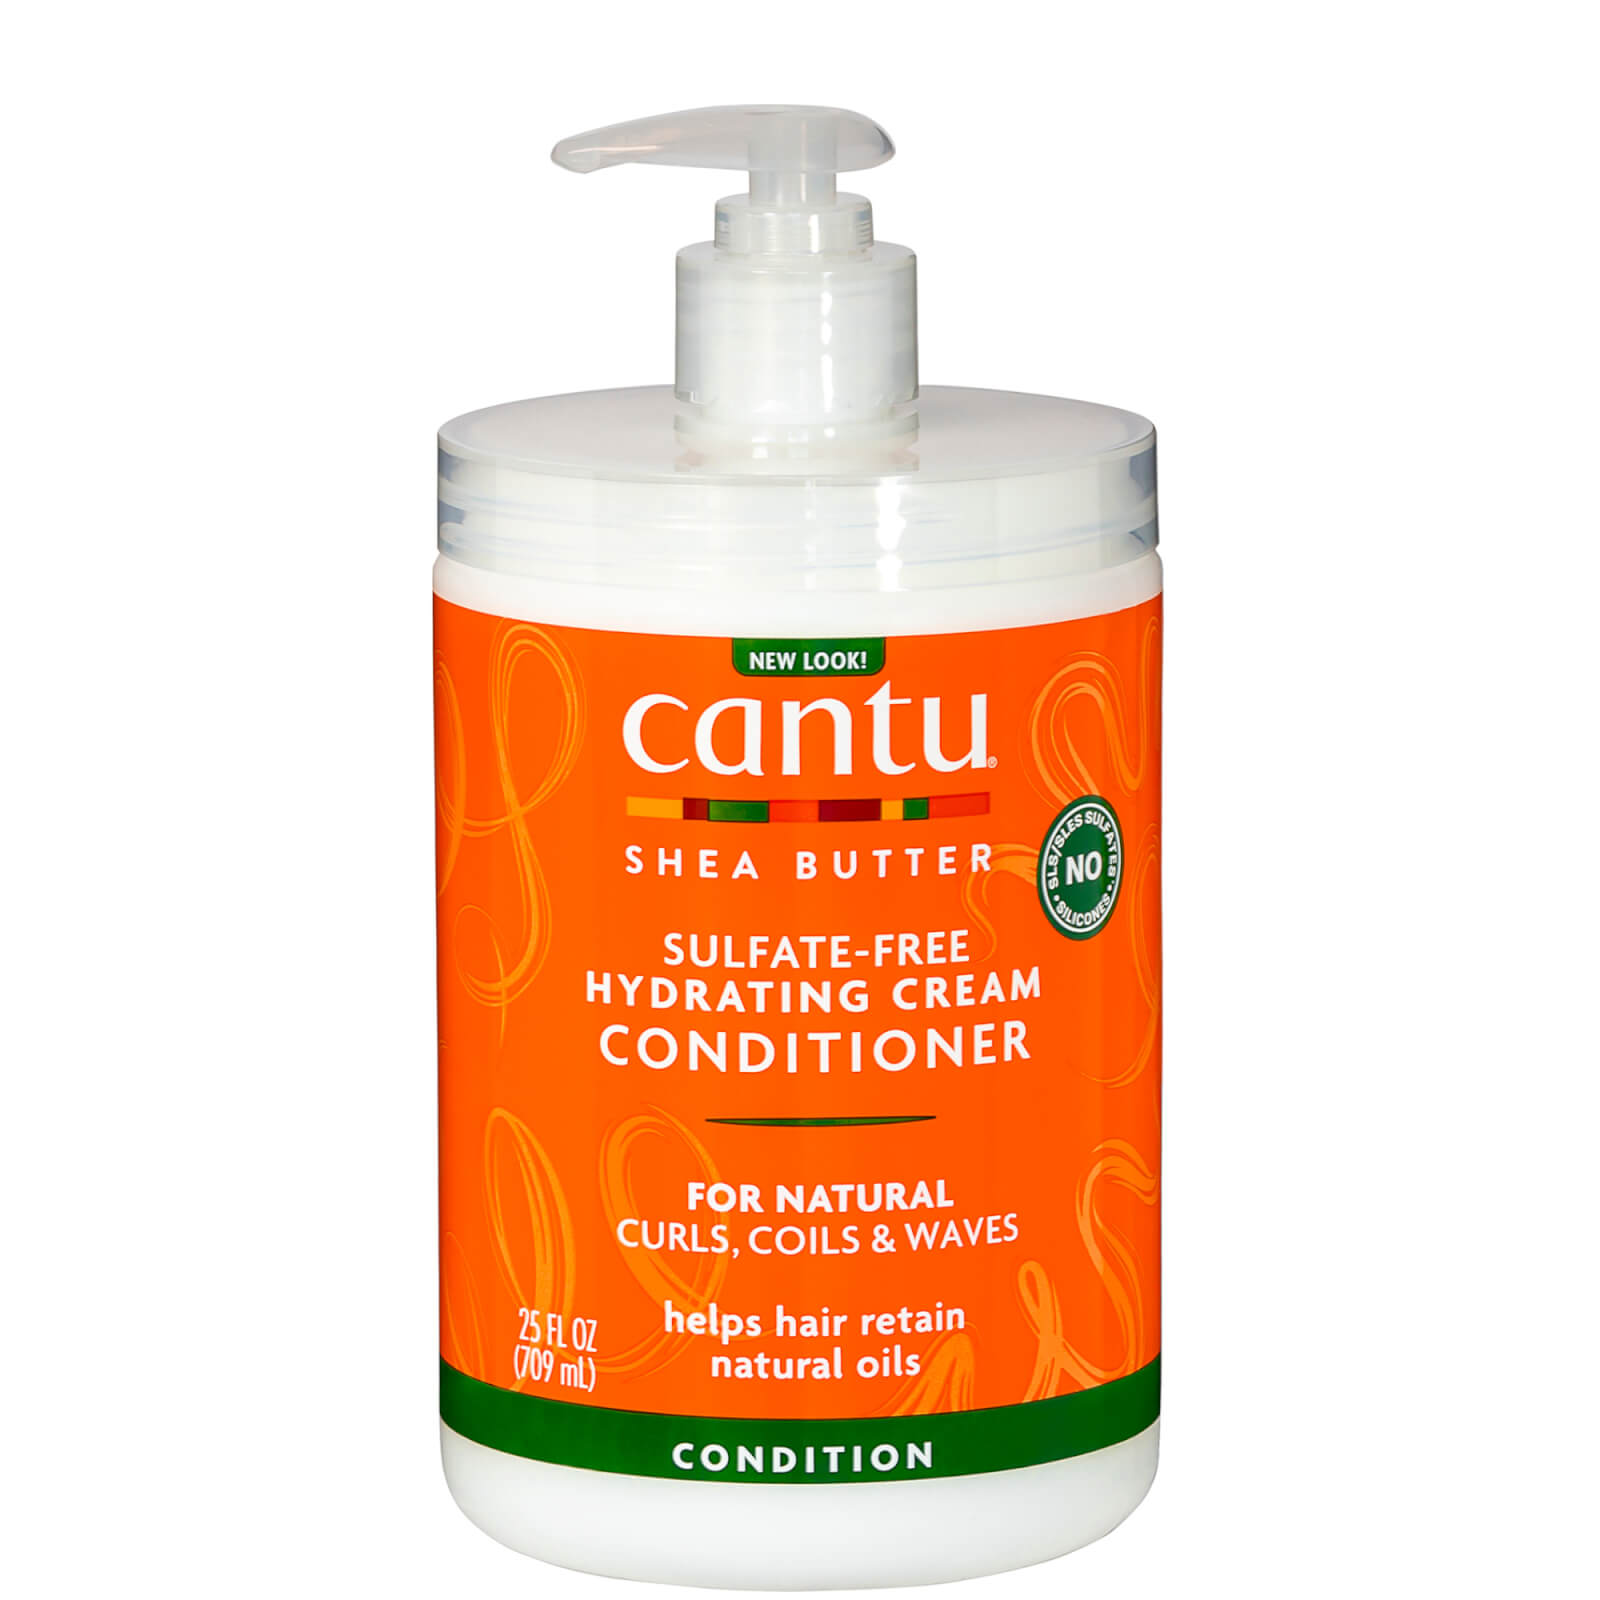 Cantu Shea Butter for Natural Hair Hydrating Cream Conditioner - Salon Size 24 oz